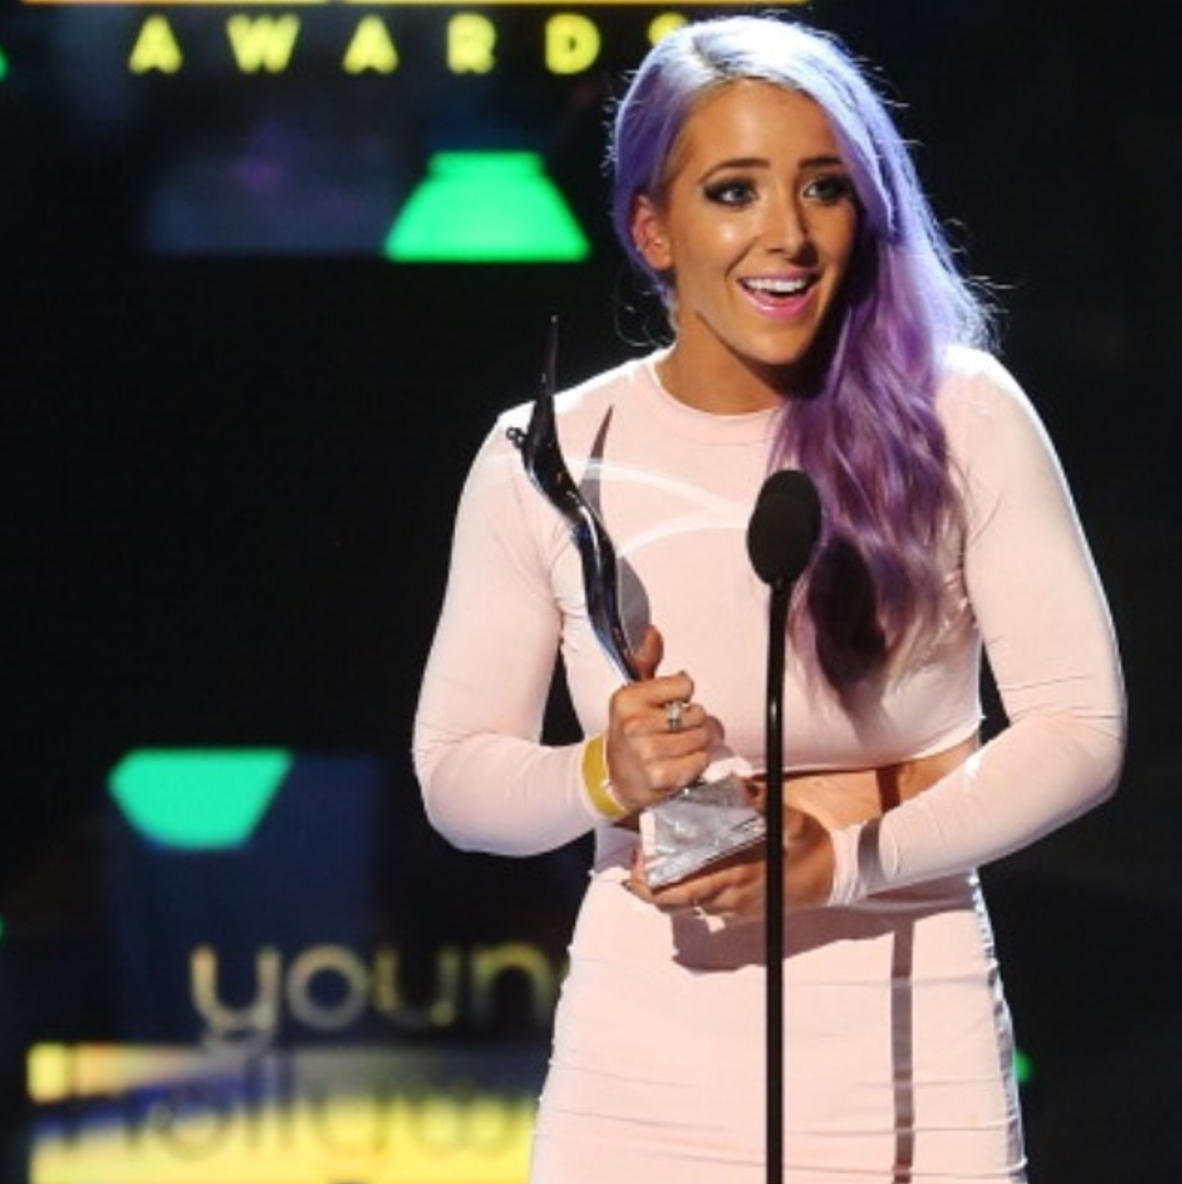 Who is Jenna Marbles? ENTITY discusses all we know about the YouTube sensation.